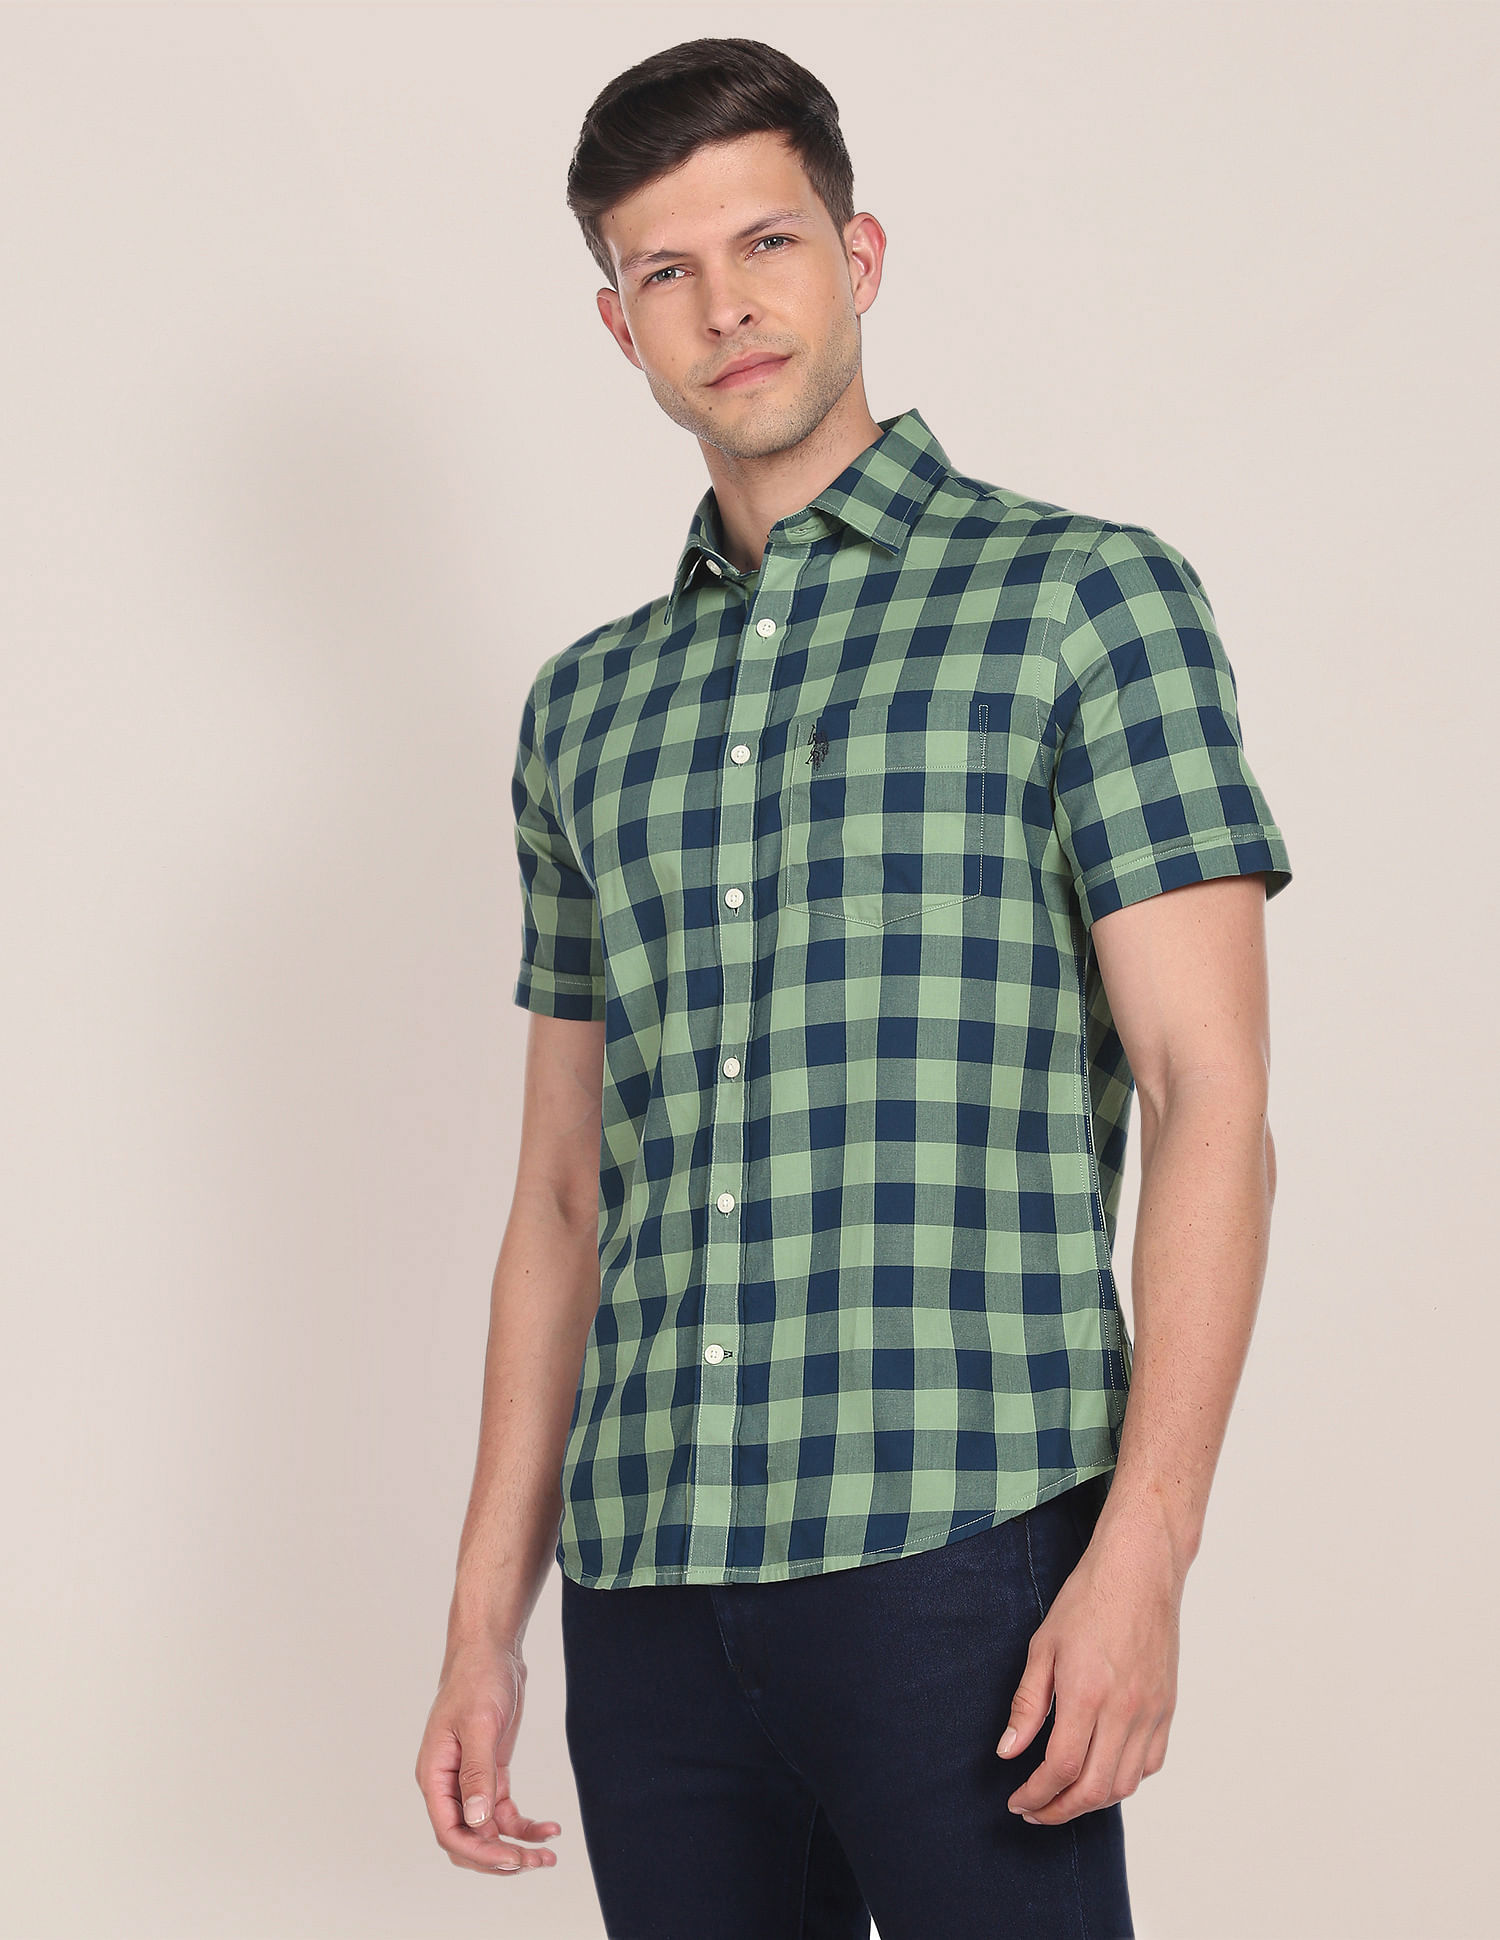 Buffalo Check Twill Workshirt  The Helm Clothing